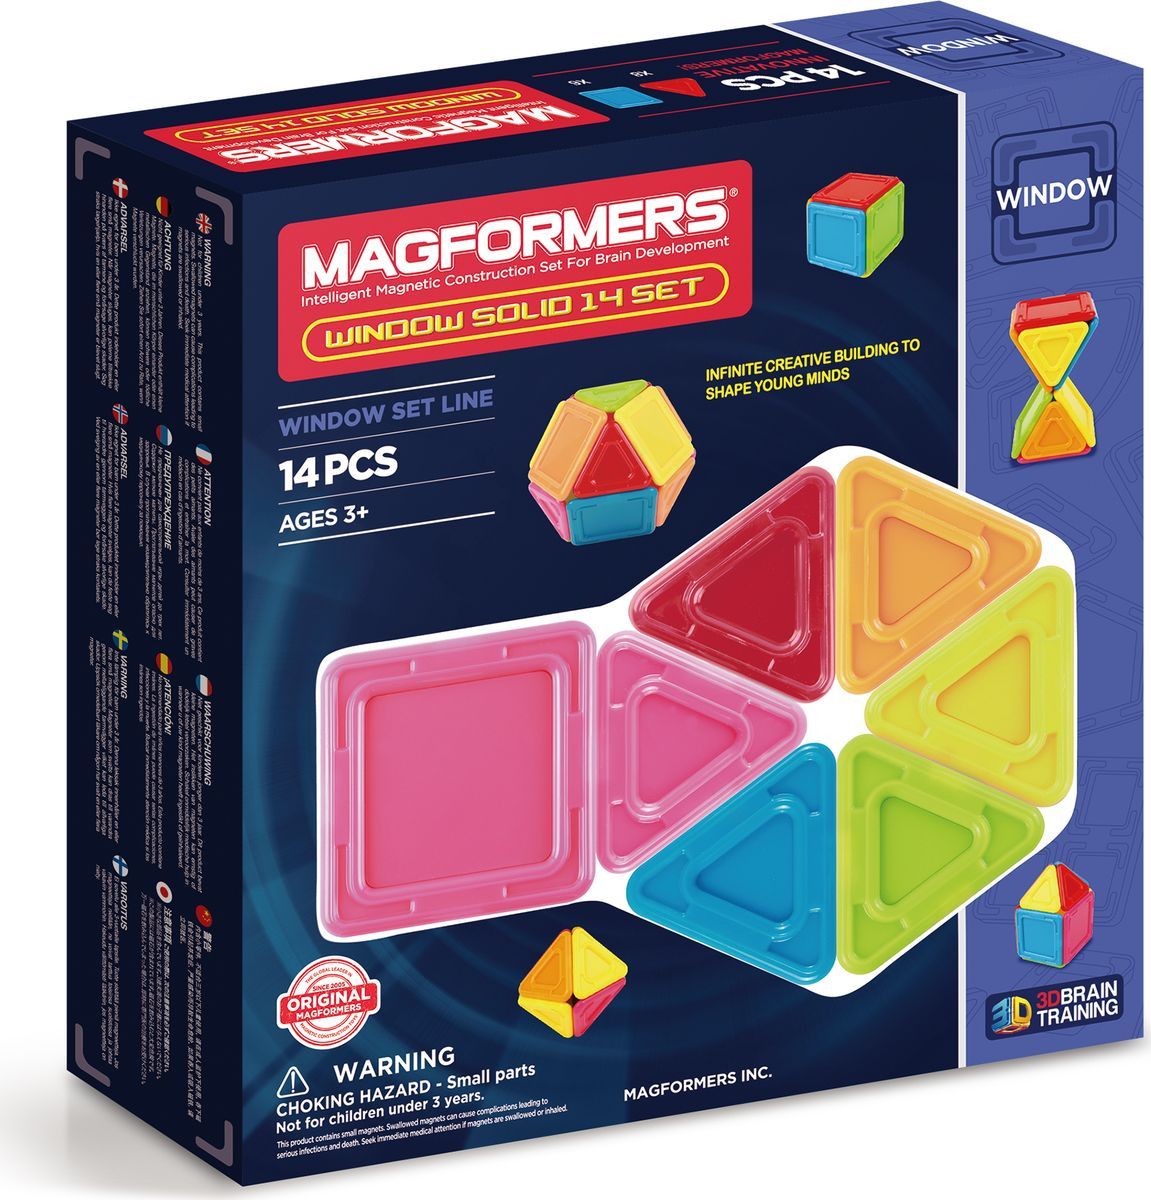 Magformers   Window Solid 14 Set